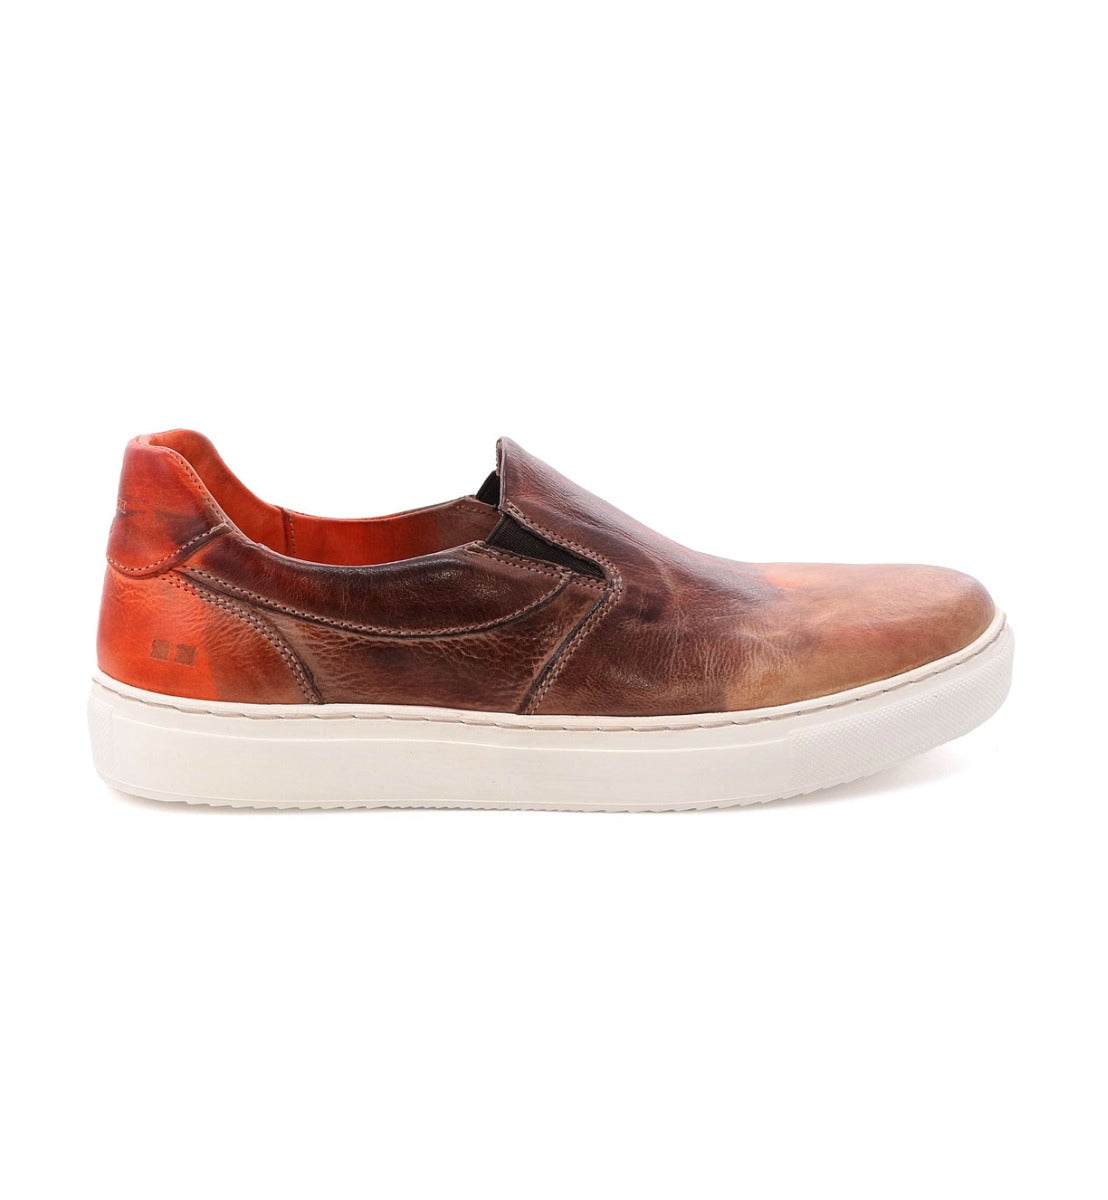 A men's slip on shoe in brown and orange, called Harry by Bed Stu.